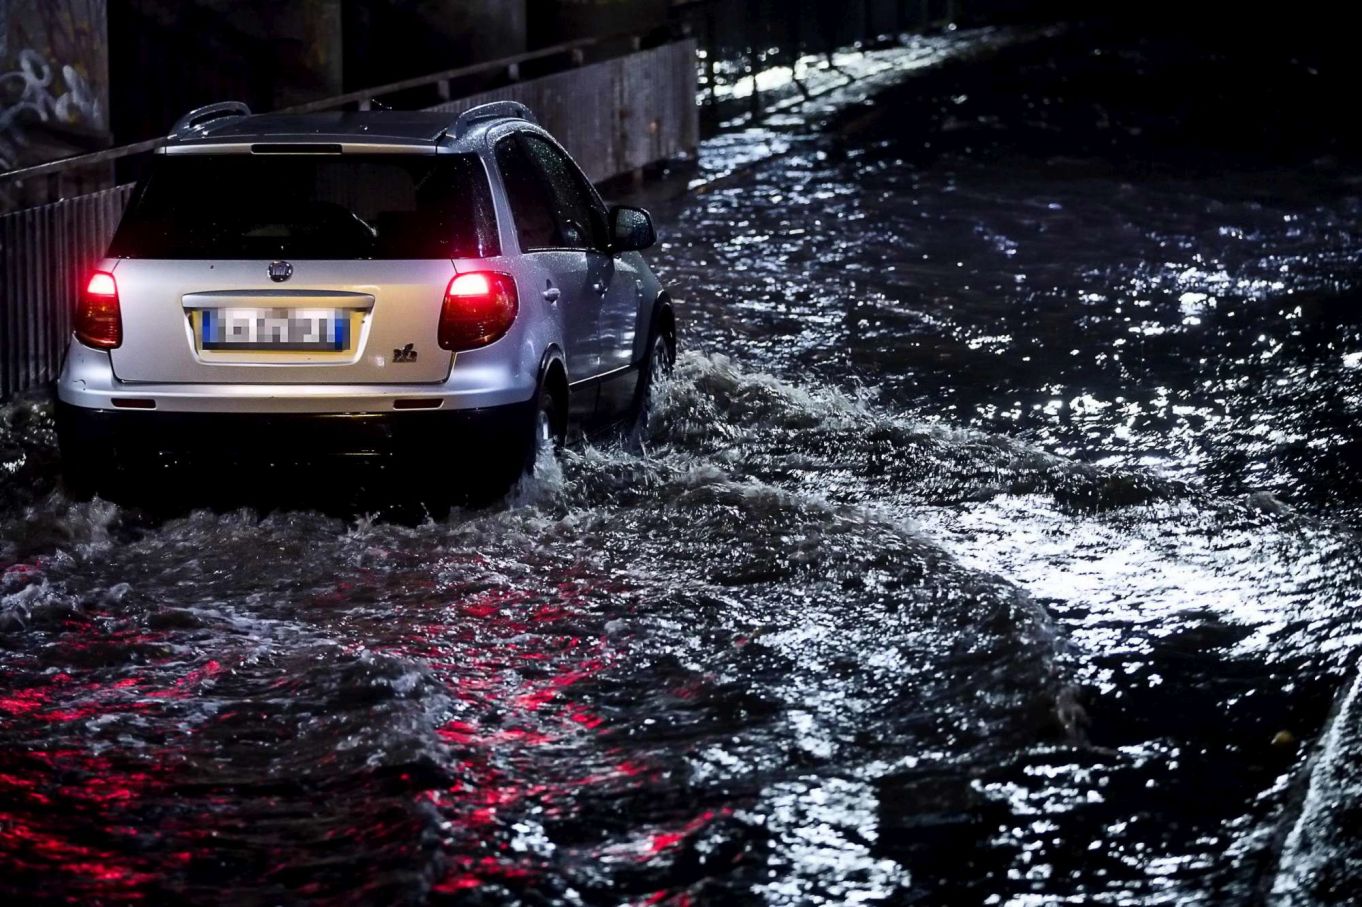 Rome motorists trapped in floods Wanted in Rome